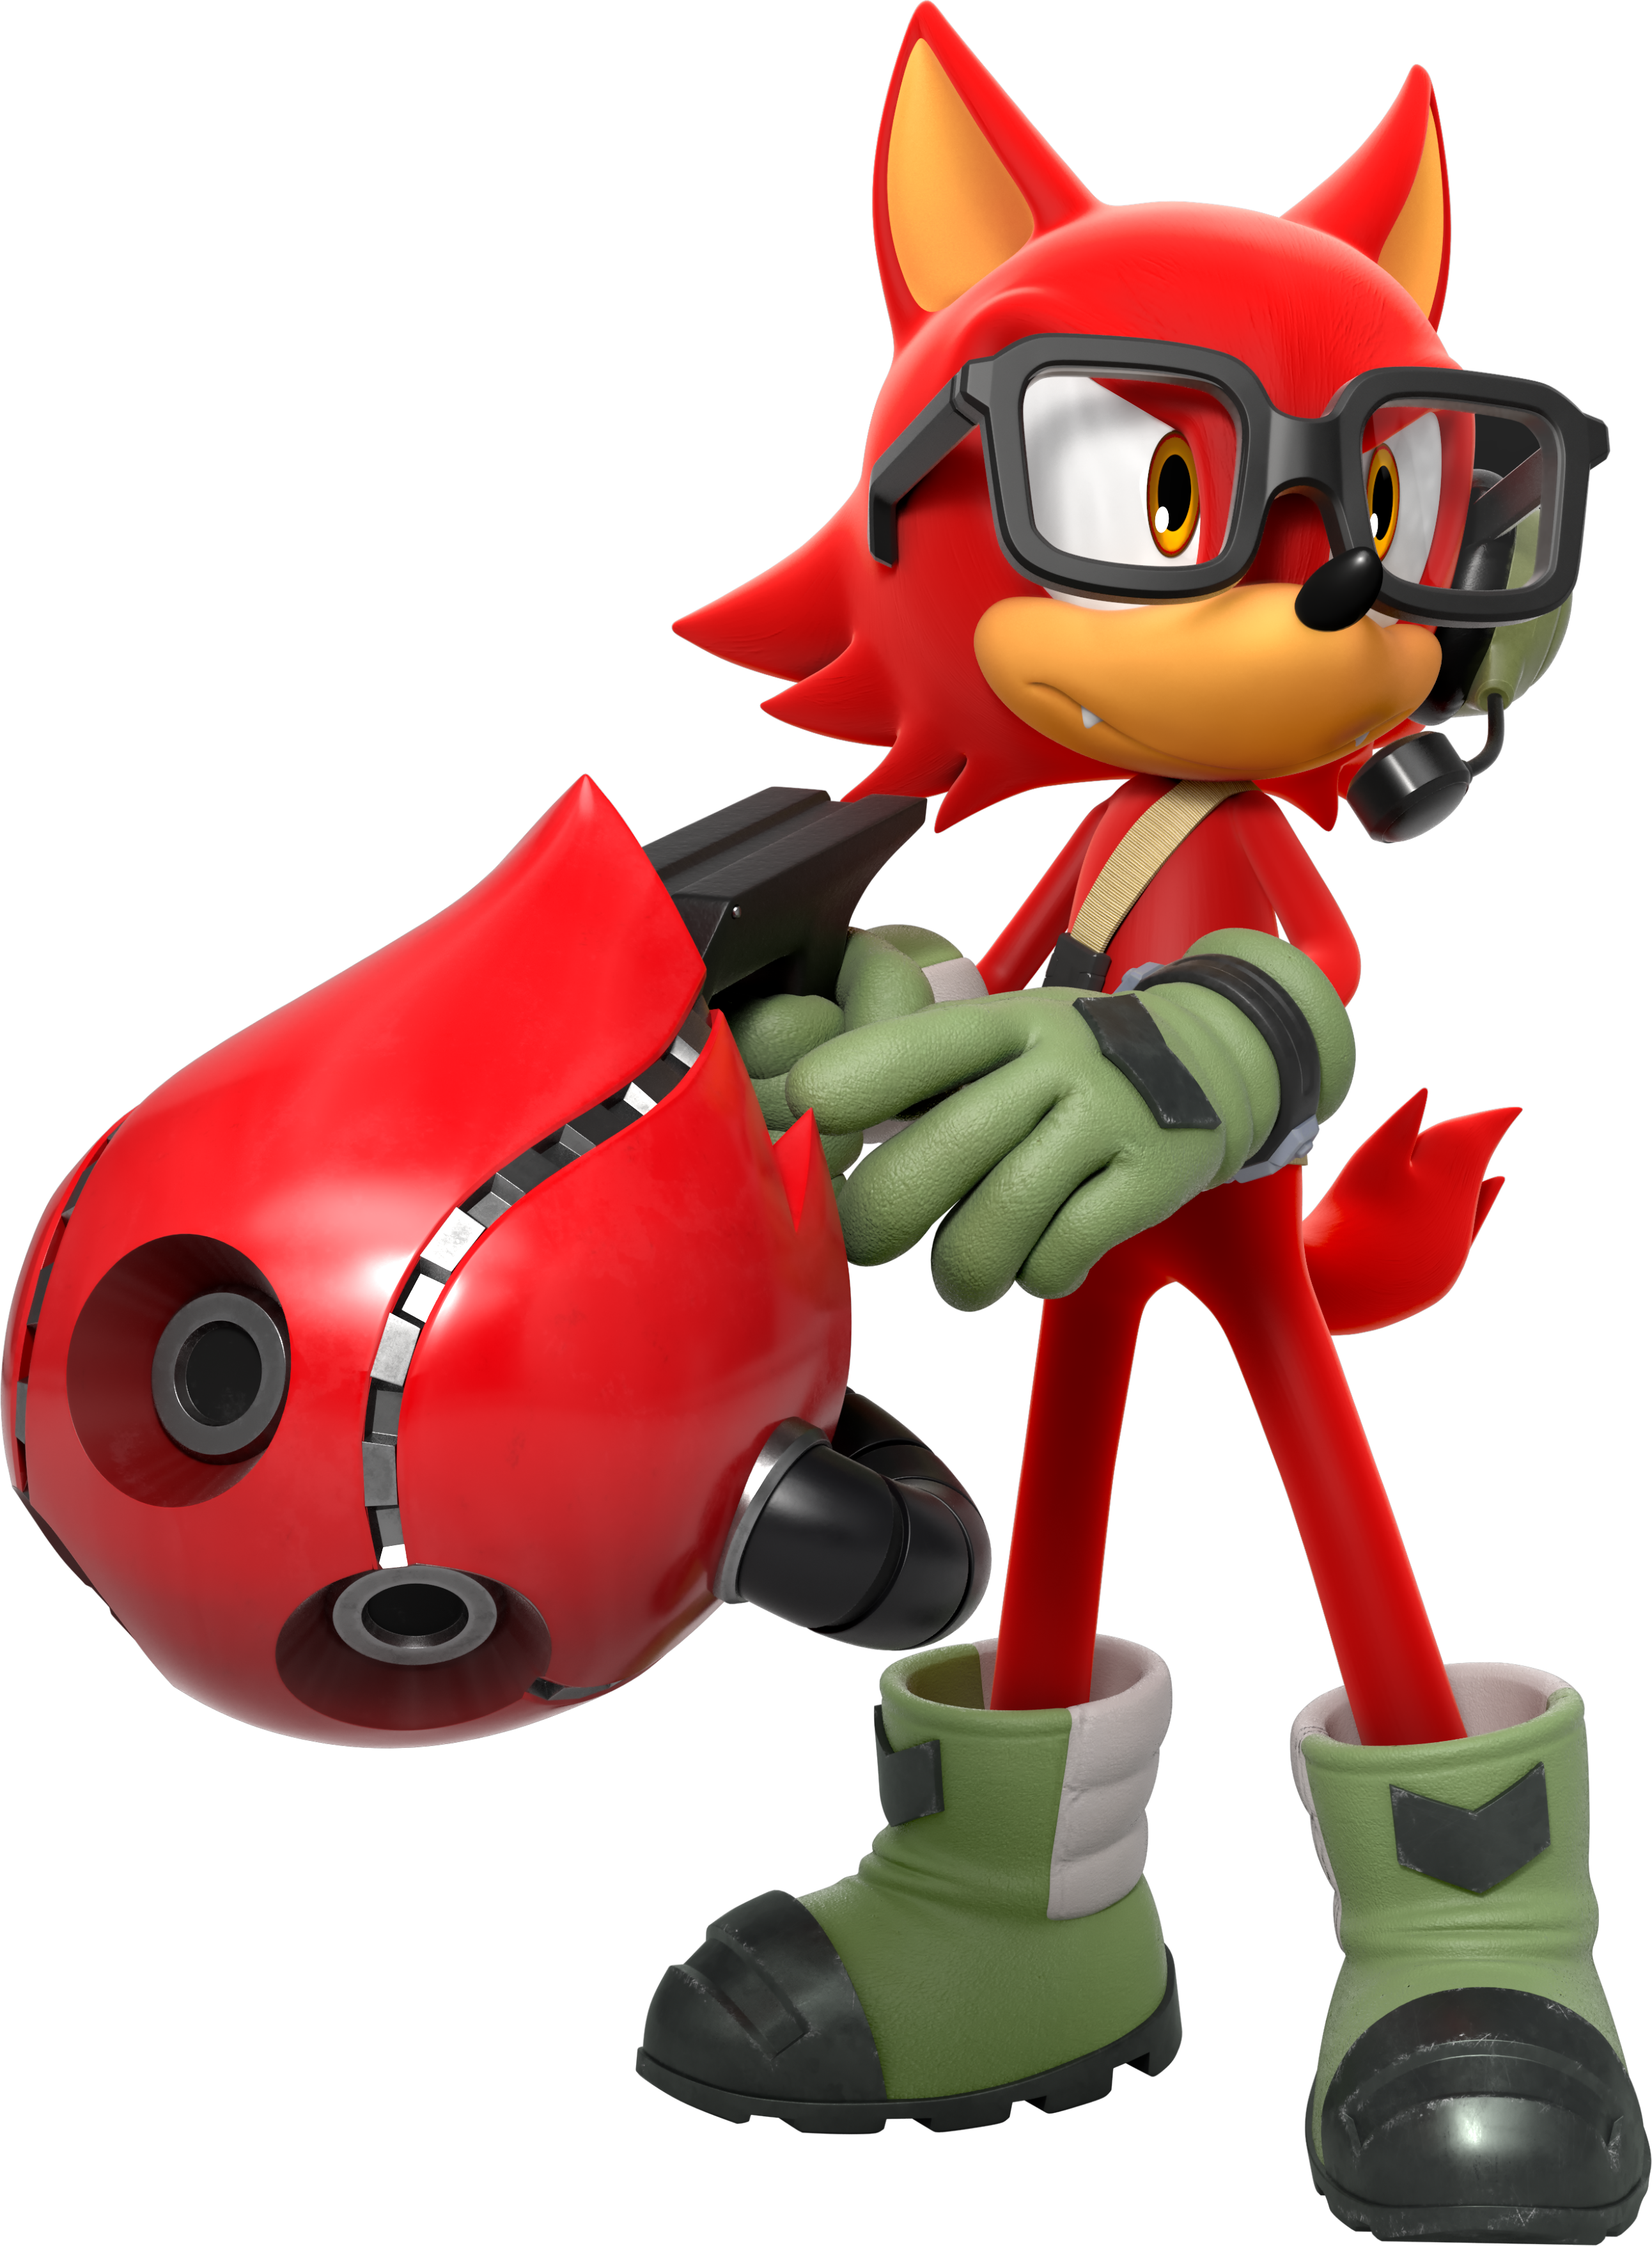 No Chao in Sonic Forces